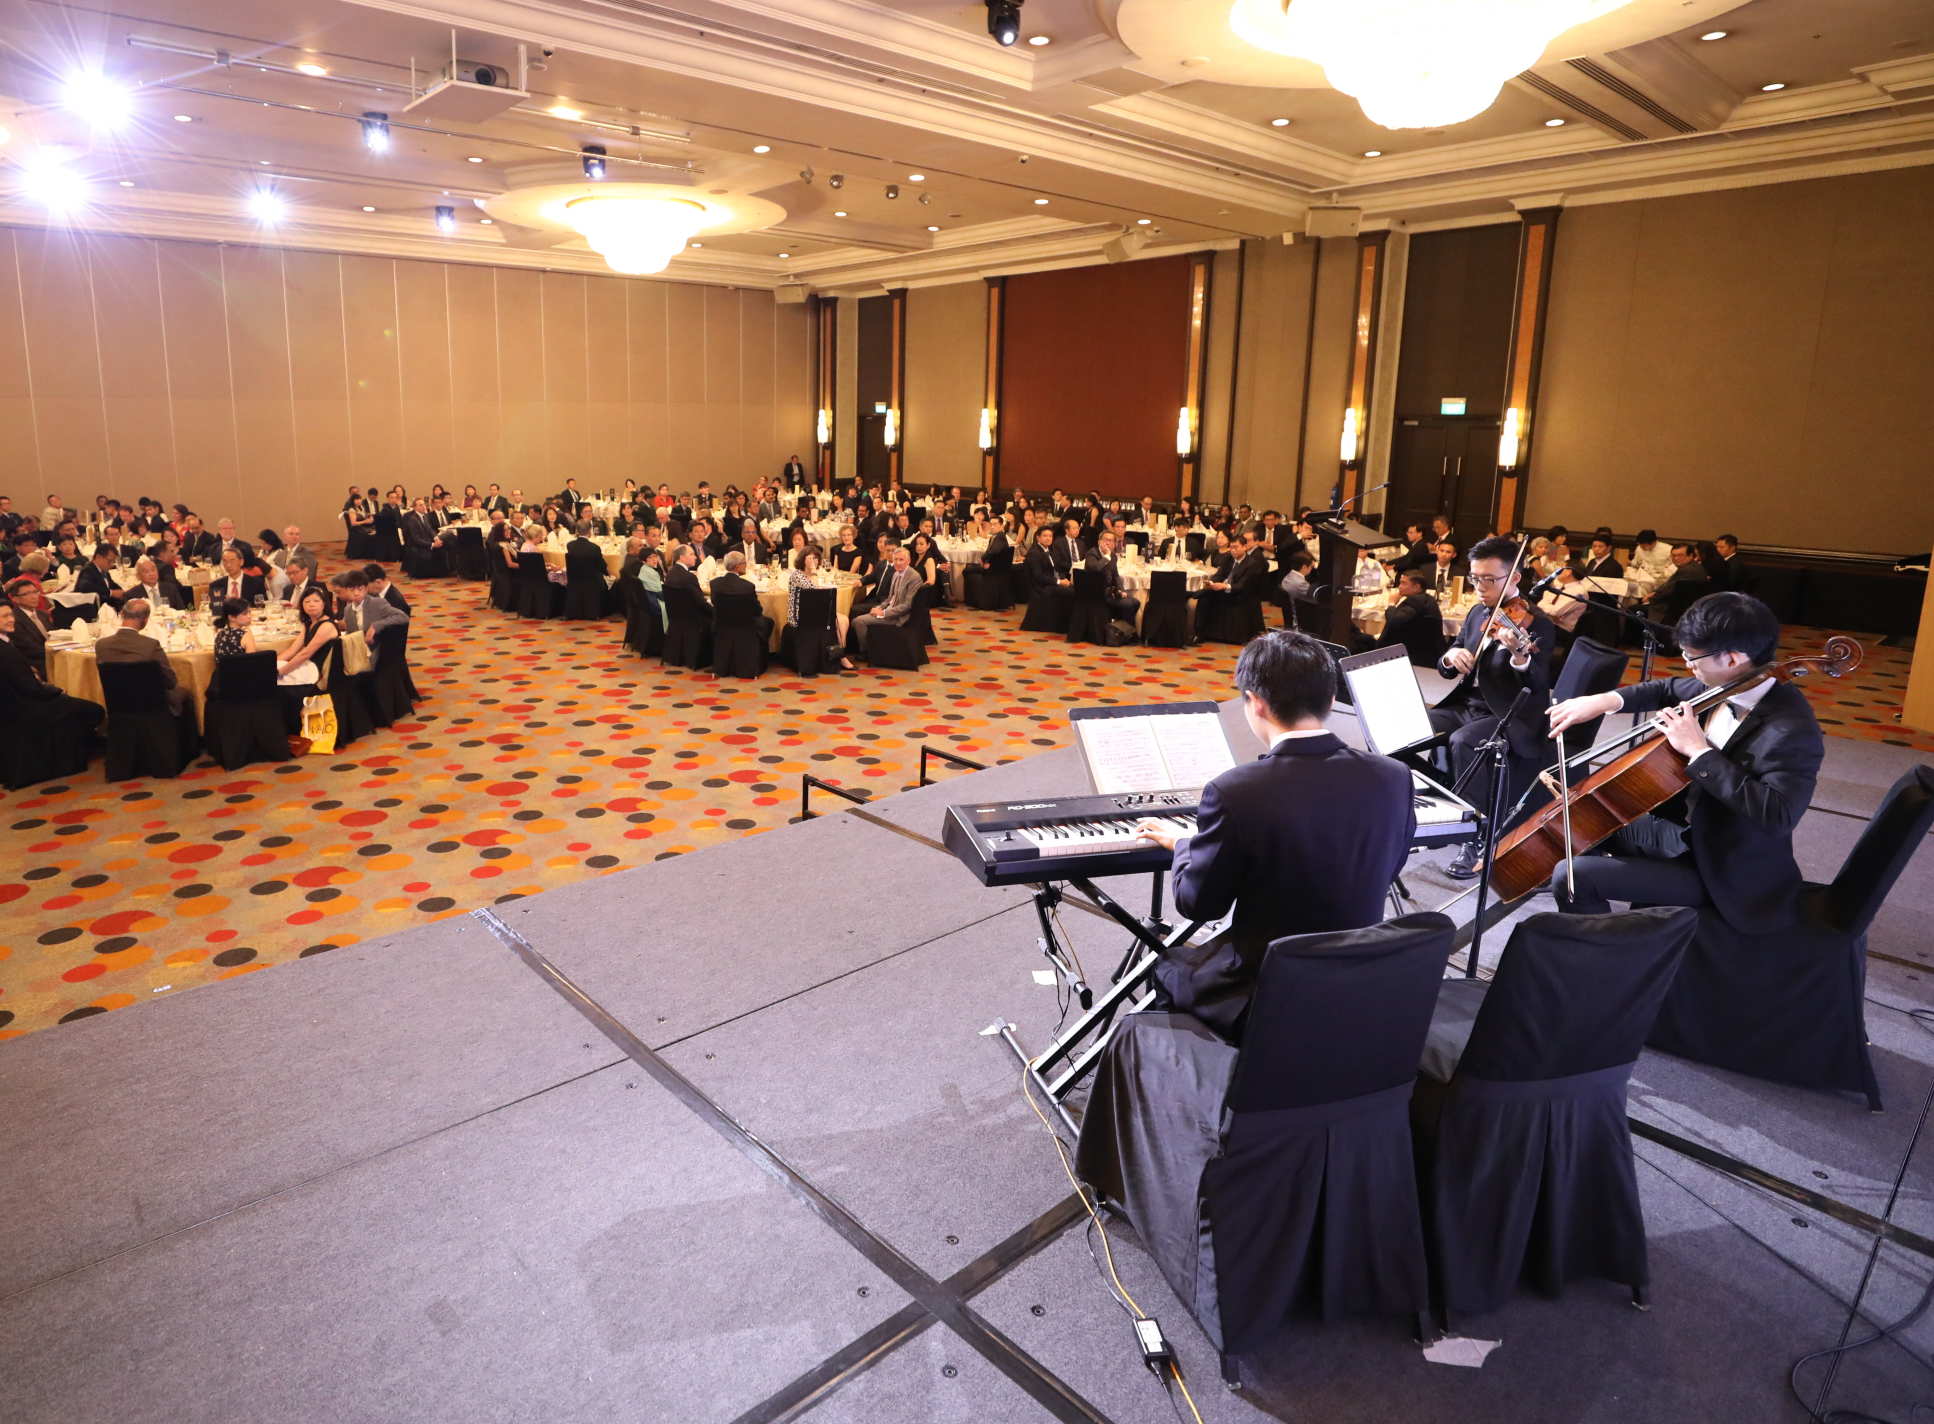 Guests were treated to classical music performances by the LKCMedicine Trio: third year students Ng Wei Ron on piano, Christopher Chua on violin and Jonathan Koo on cello.